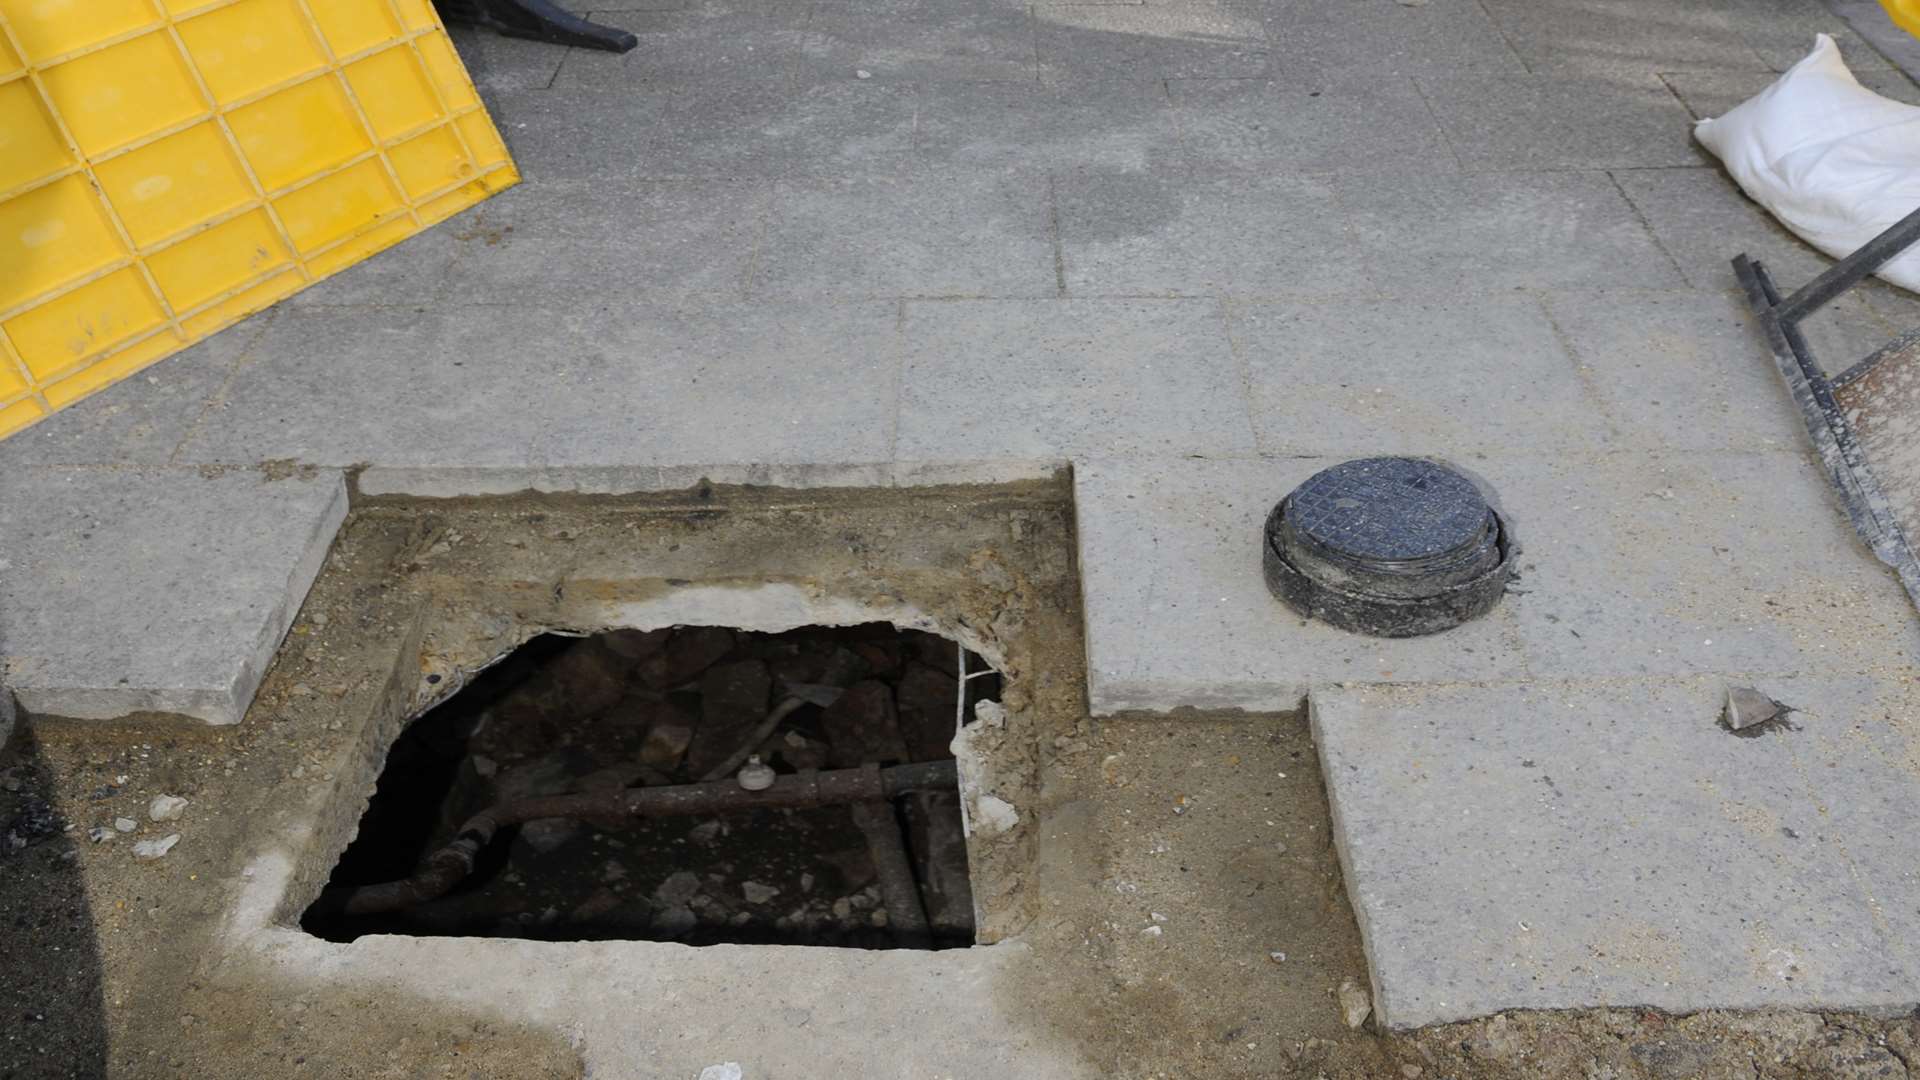 A huge hole can be seen in the pavement